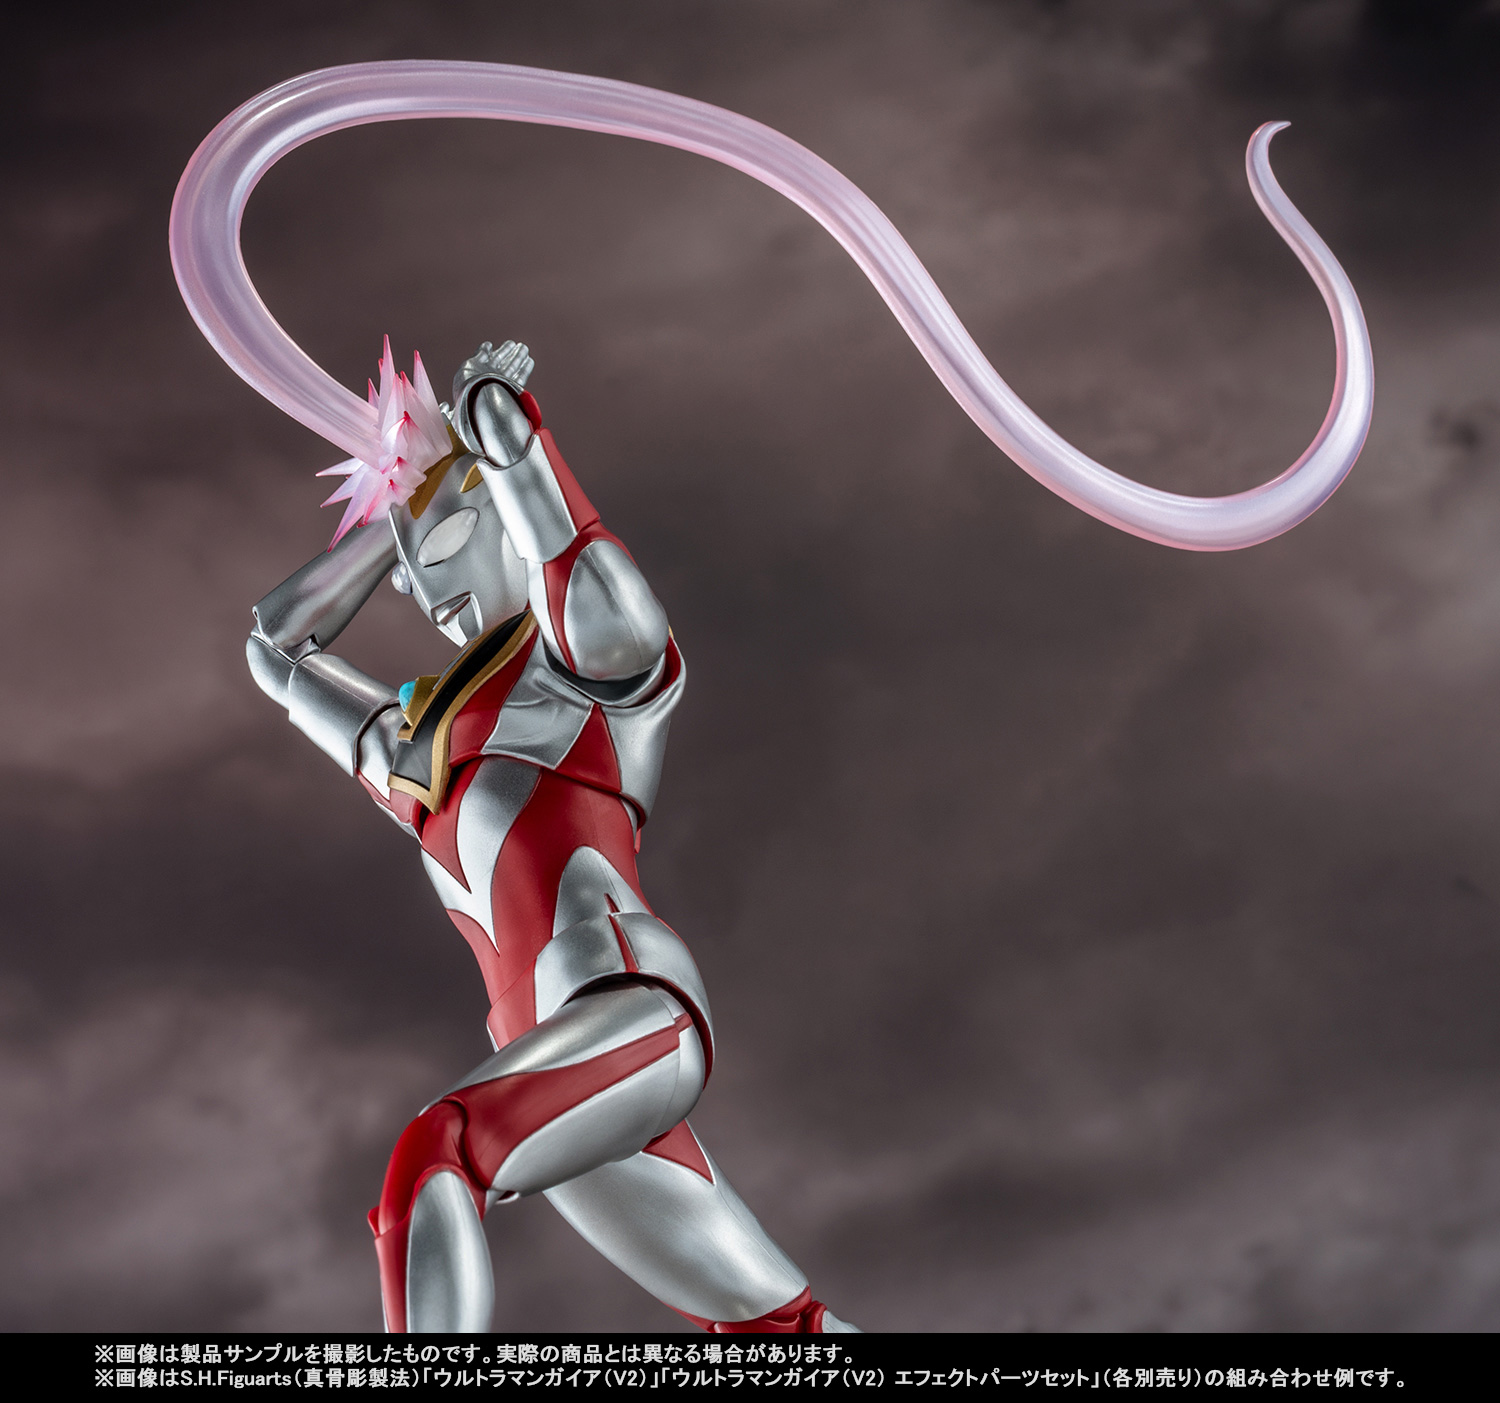 Giant of light stands on the earth! Introducing &quot;S.H.Figuarts (SHINKOCCHOU SEIHOU) Ultrama Gaia (V2)&quot; and &quot;Effect Parts Set&quot;, which will go on sale in stores on June 22 (Sat).